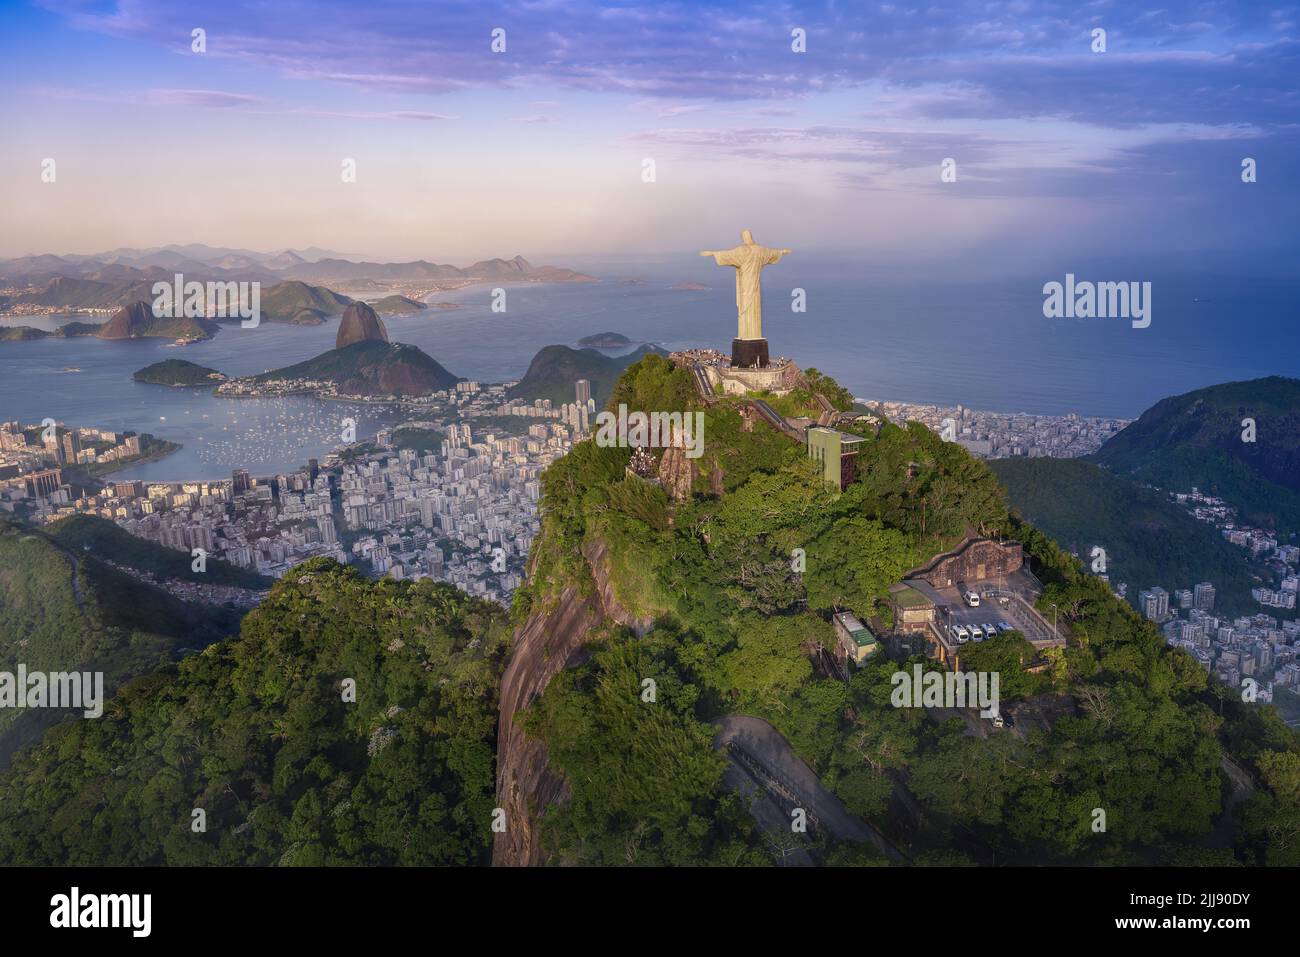 Aerial view of Rio with Corcovado Mountain, Sugarloaf Mountain and Guanabara Bay at sunset - Rio de Janeiro, Brazil Stock Photo